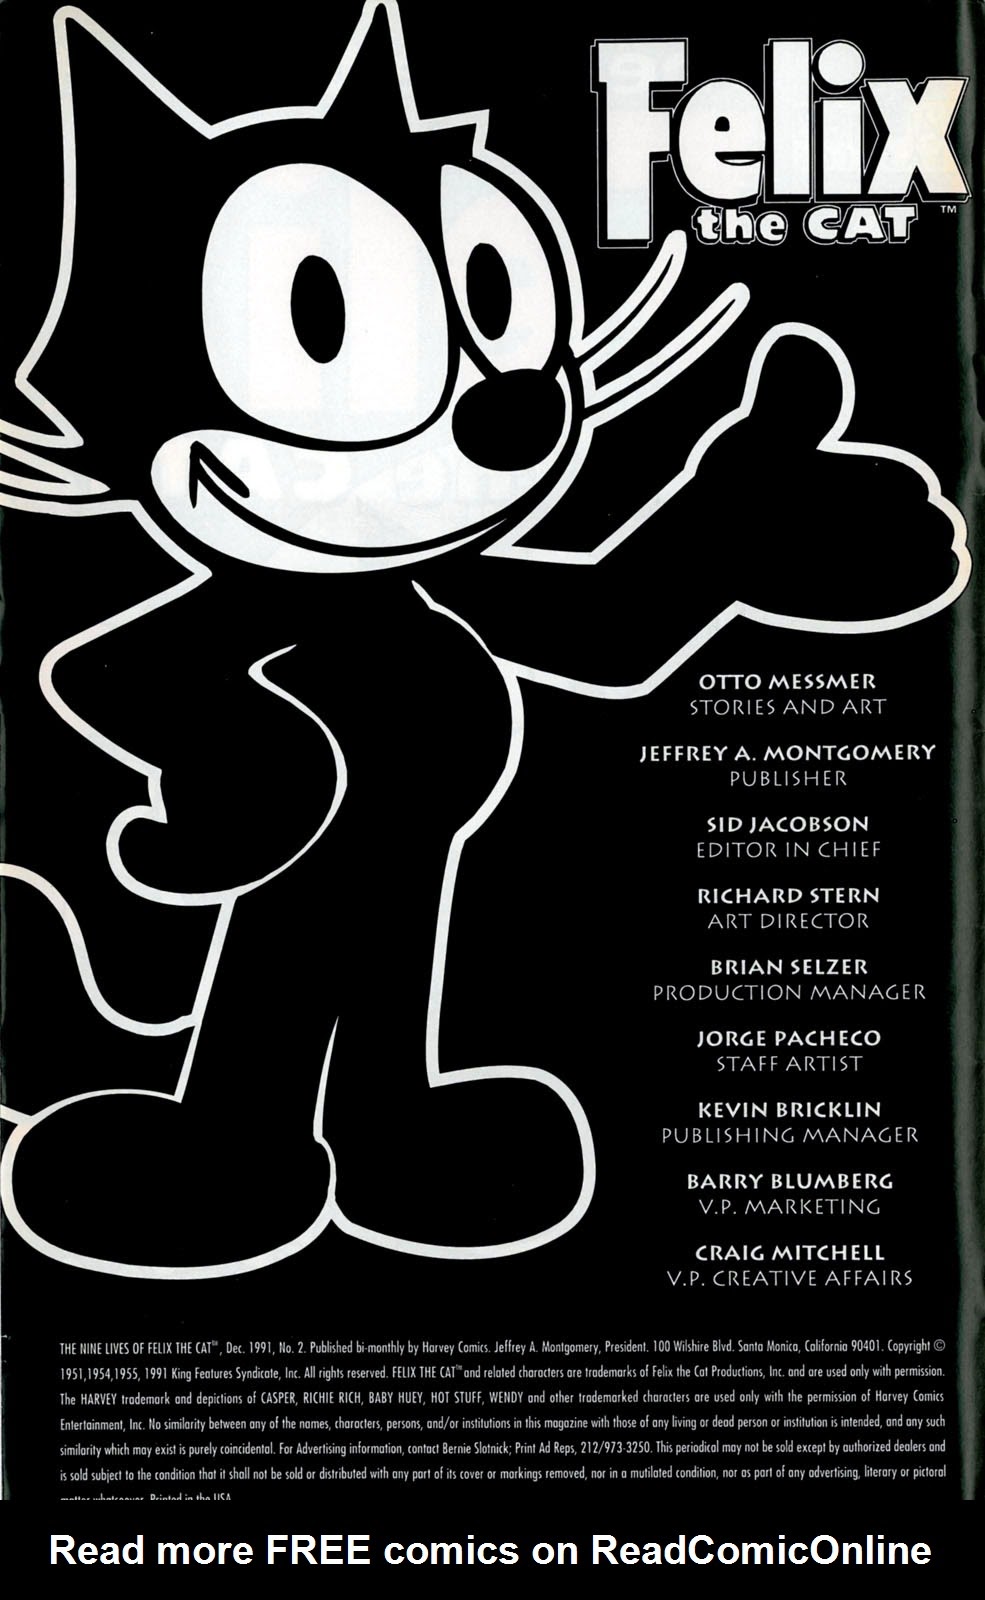 Read online Nine Lives of Felix the Cat comic -  Issue #2 - 2